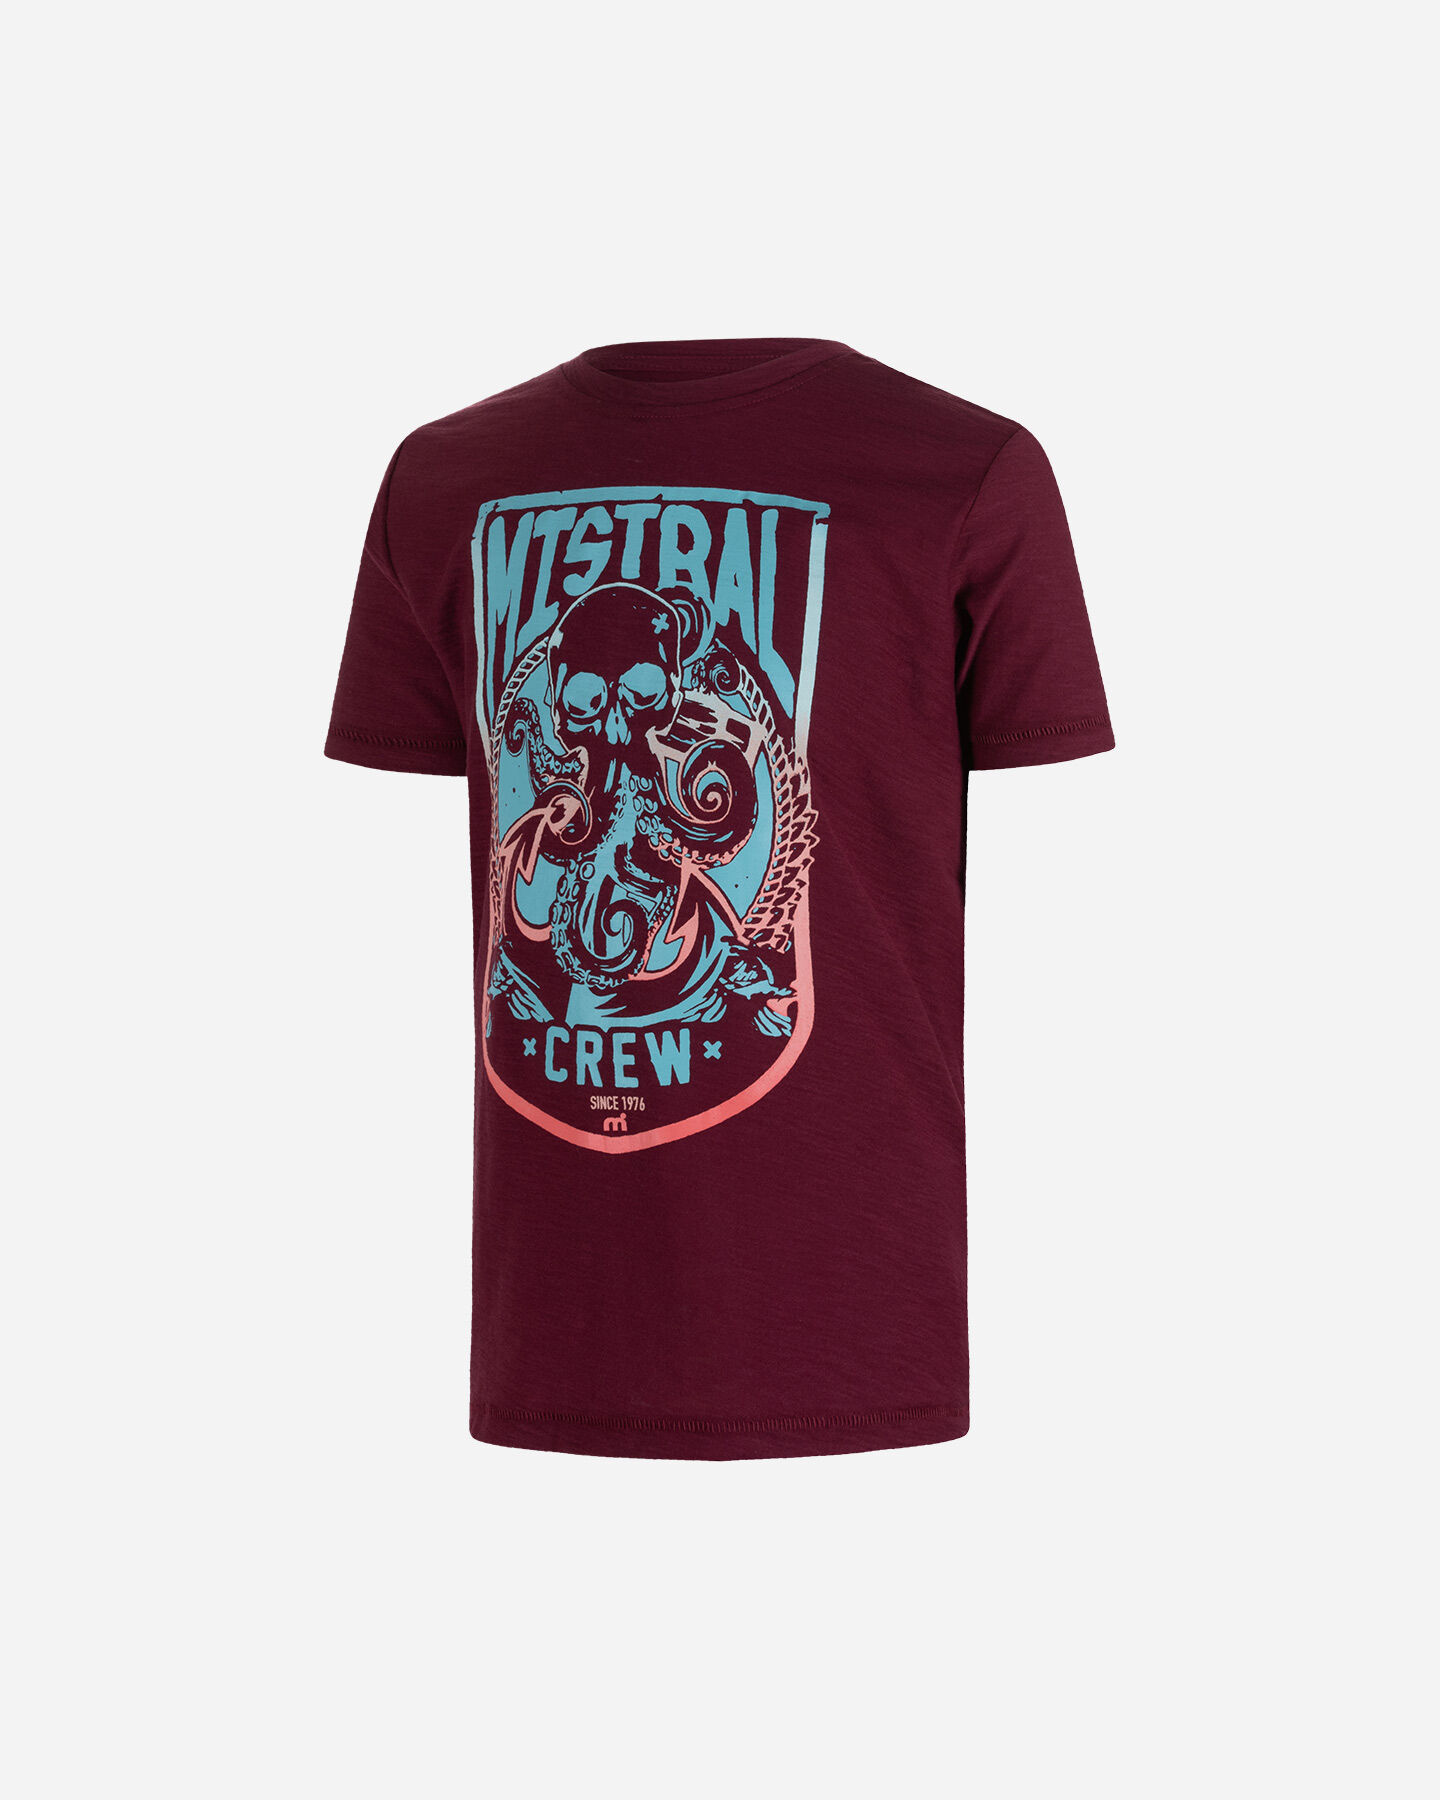  T-Shirt MISTRAL SKULL JR S4118414|299|8A scatto 0